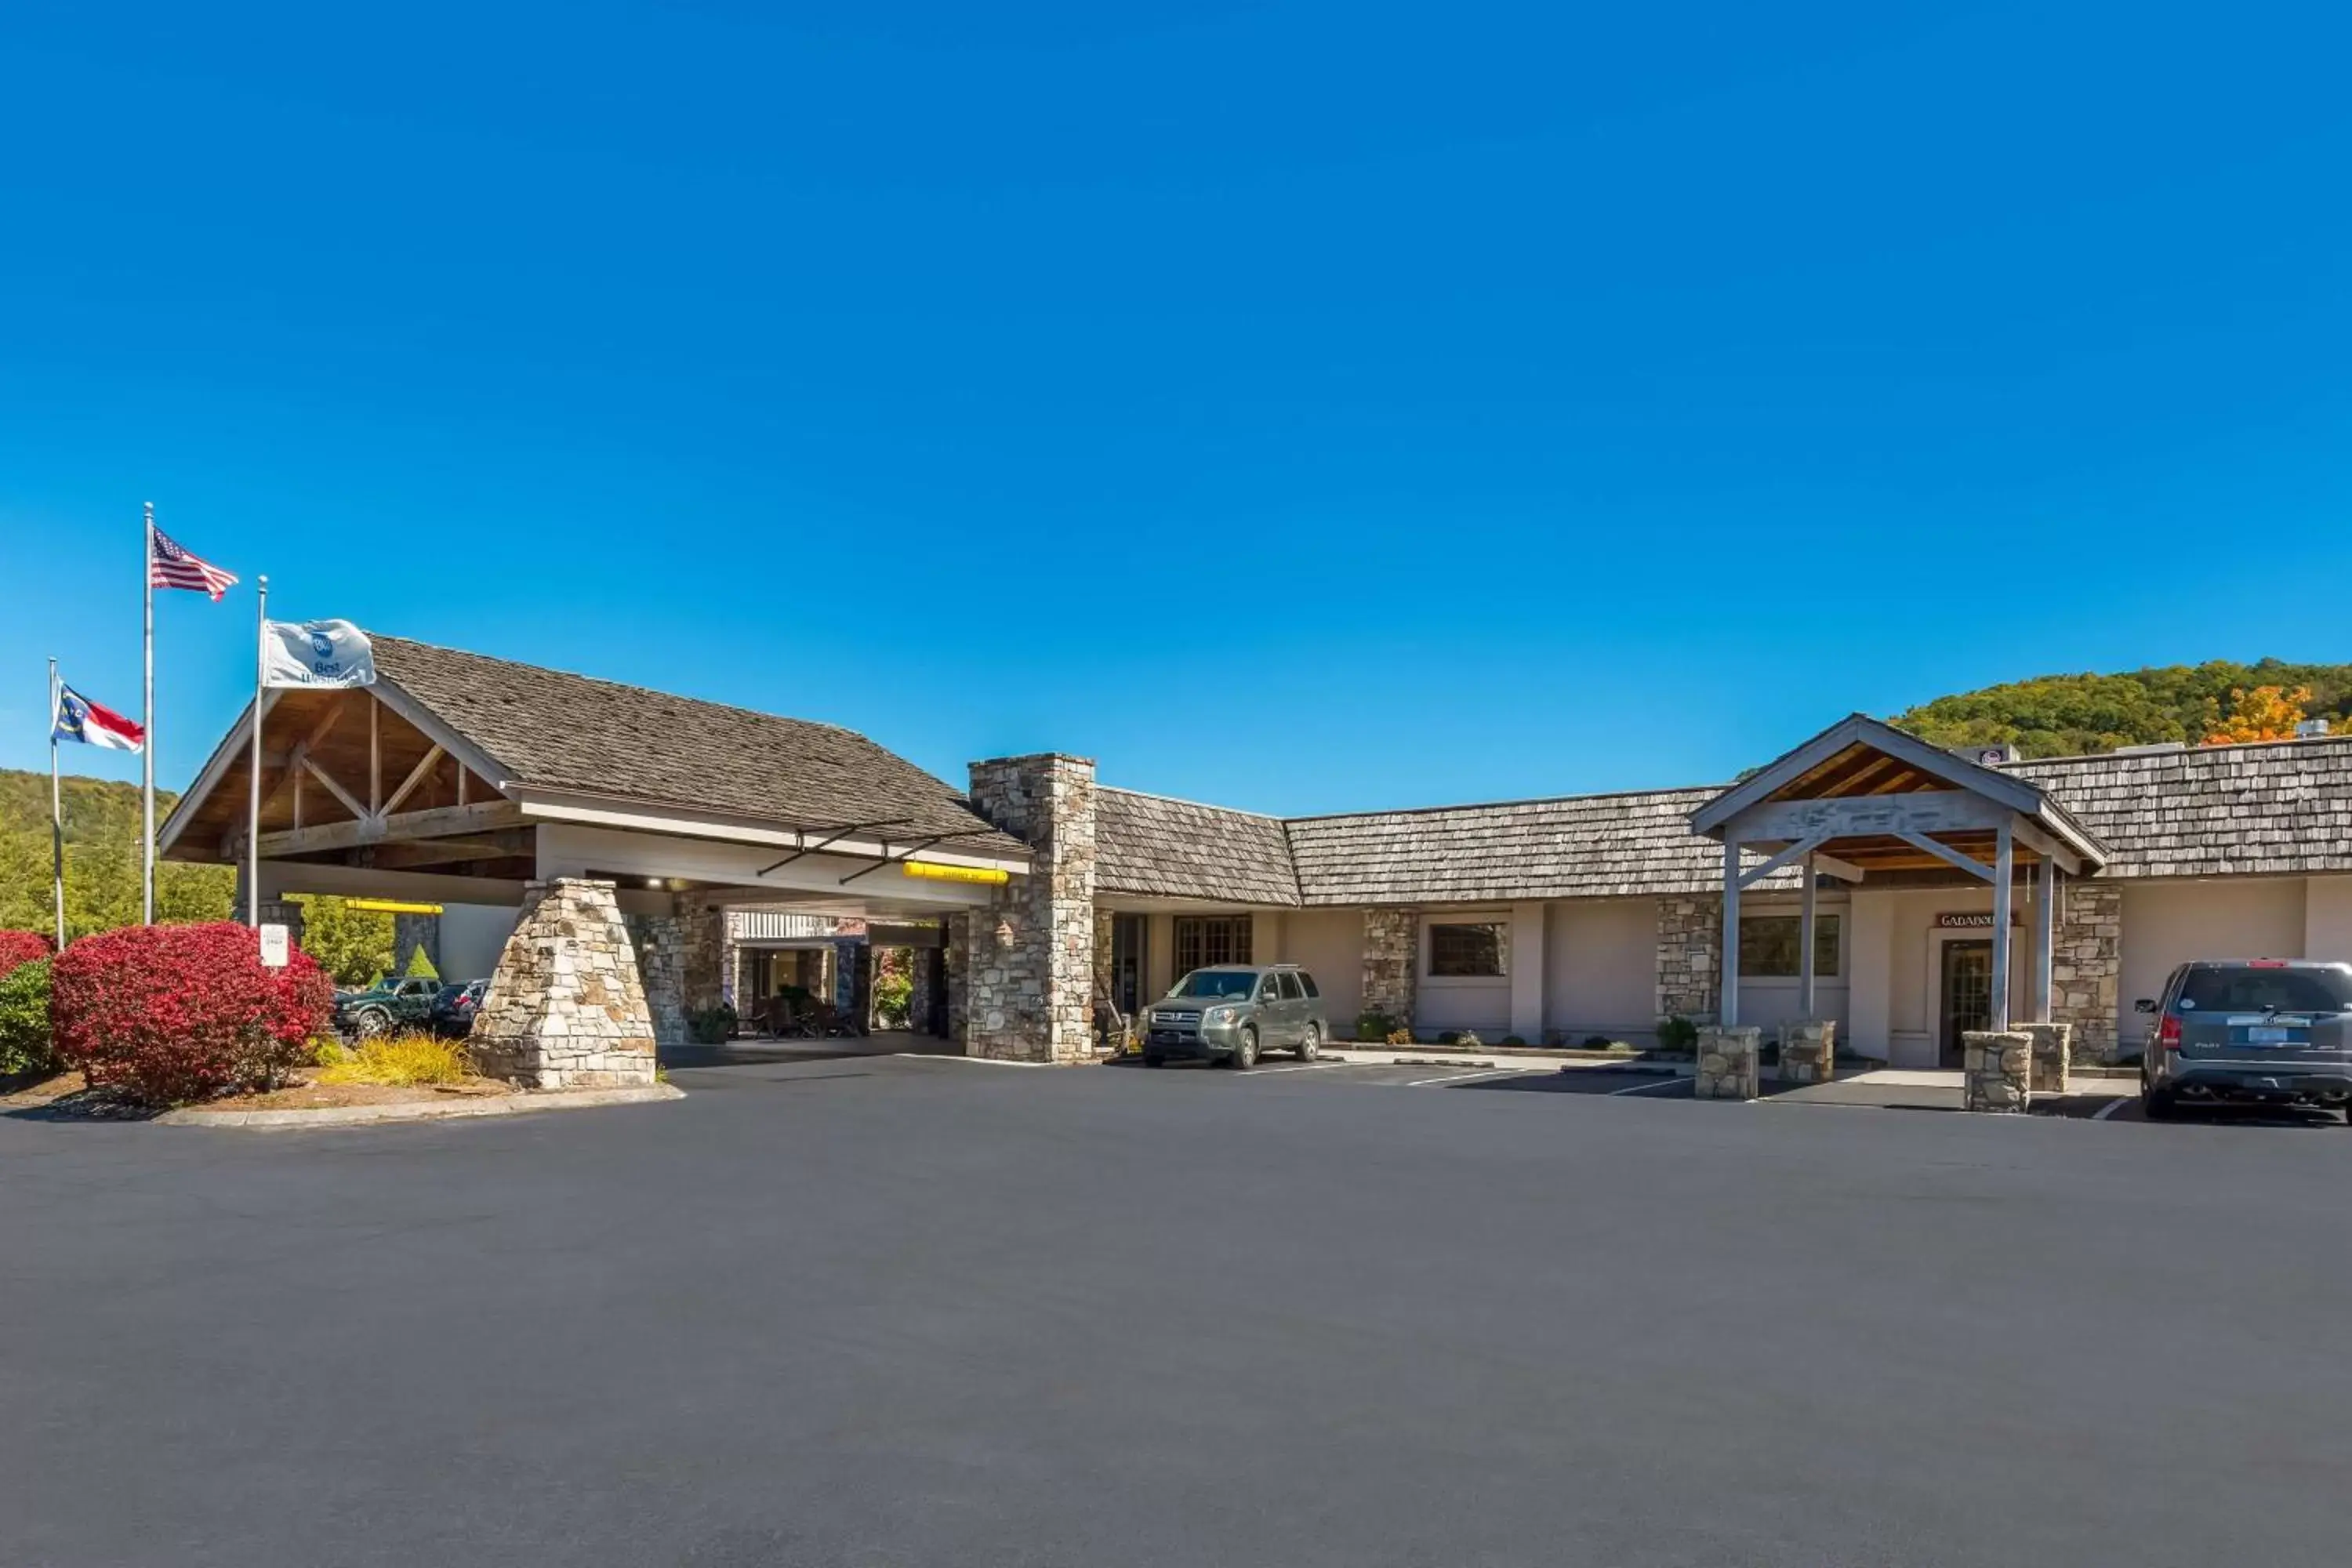 Property Building in Best Western Mountain Lodge At Banner Elk